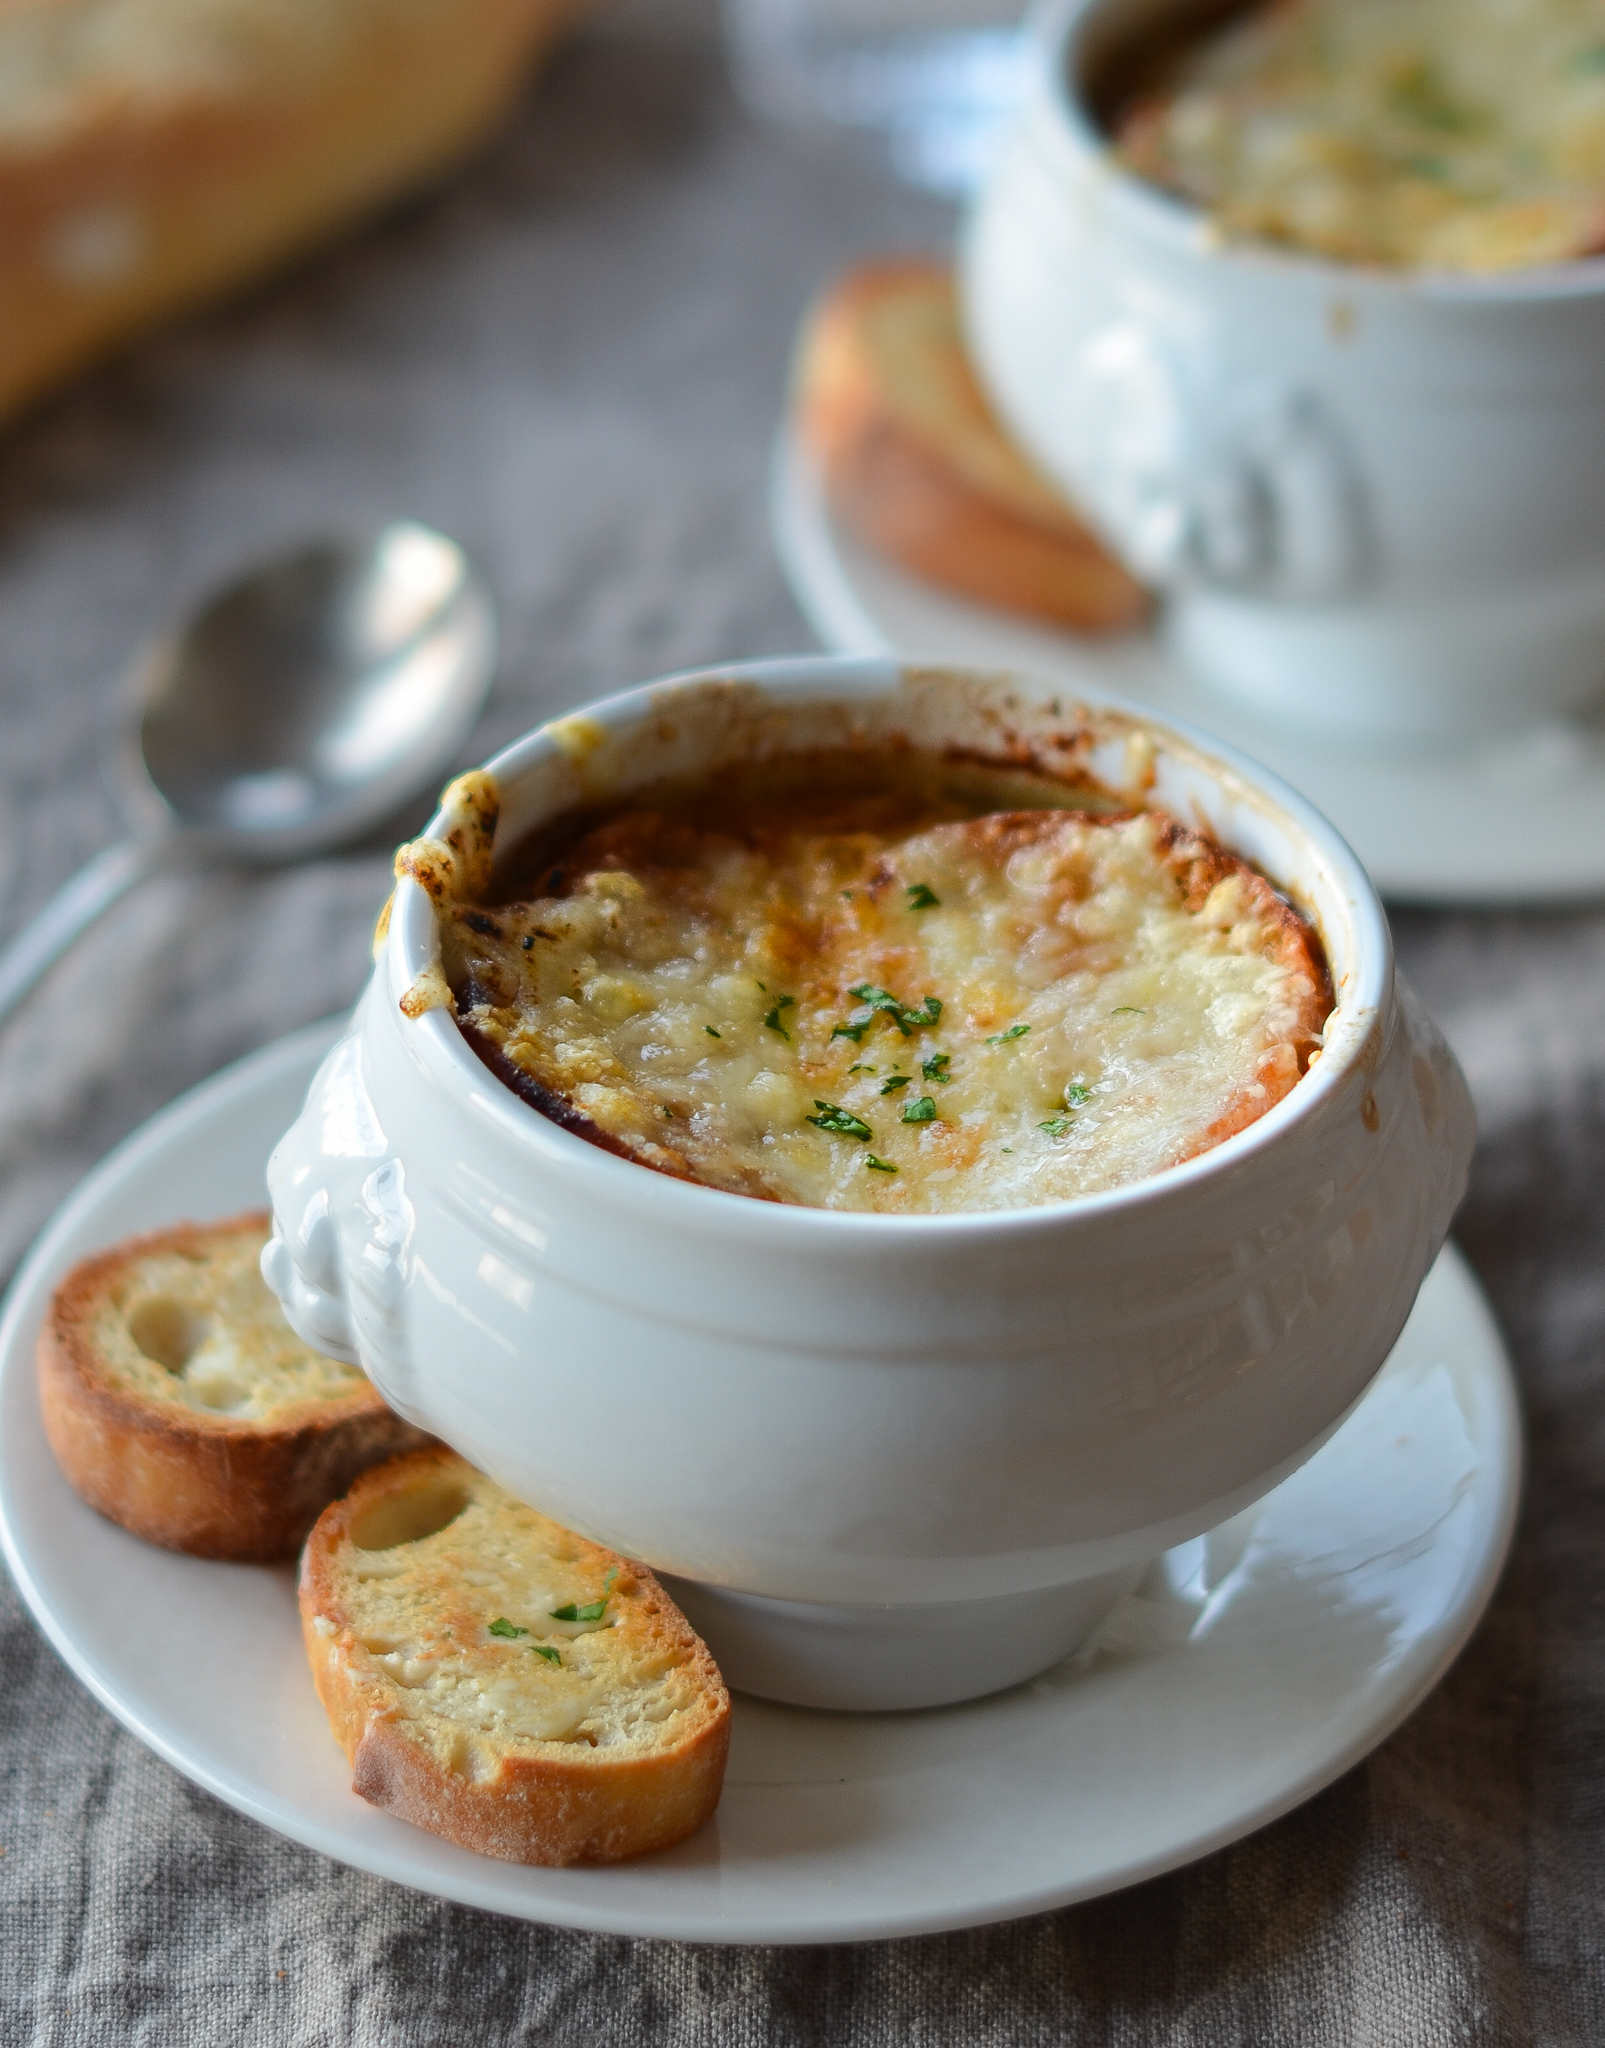 https://www.onceuponachef.com/images/2019/02/french-onion-soup-1.jpg